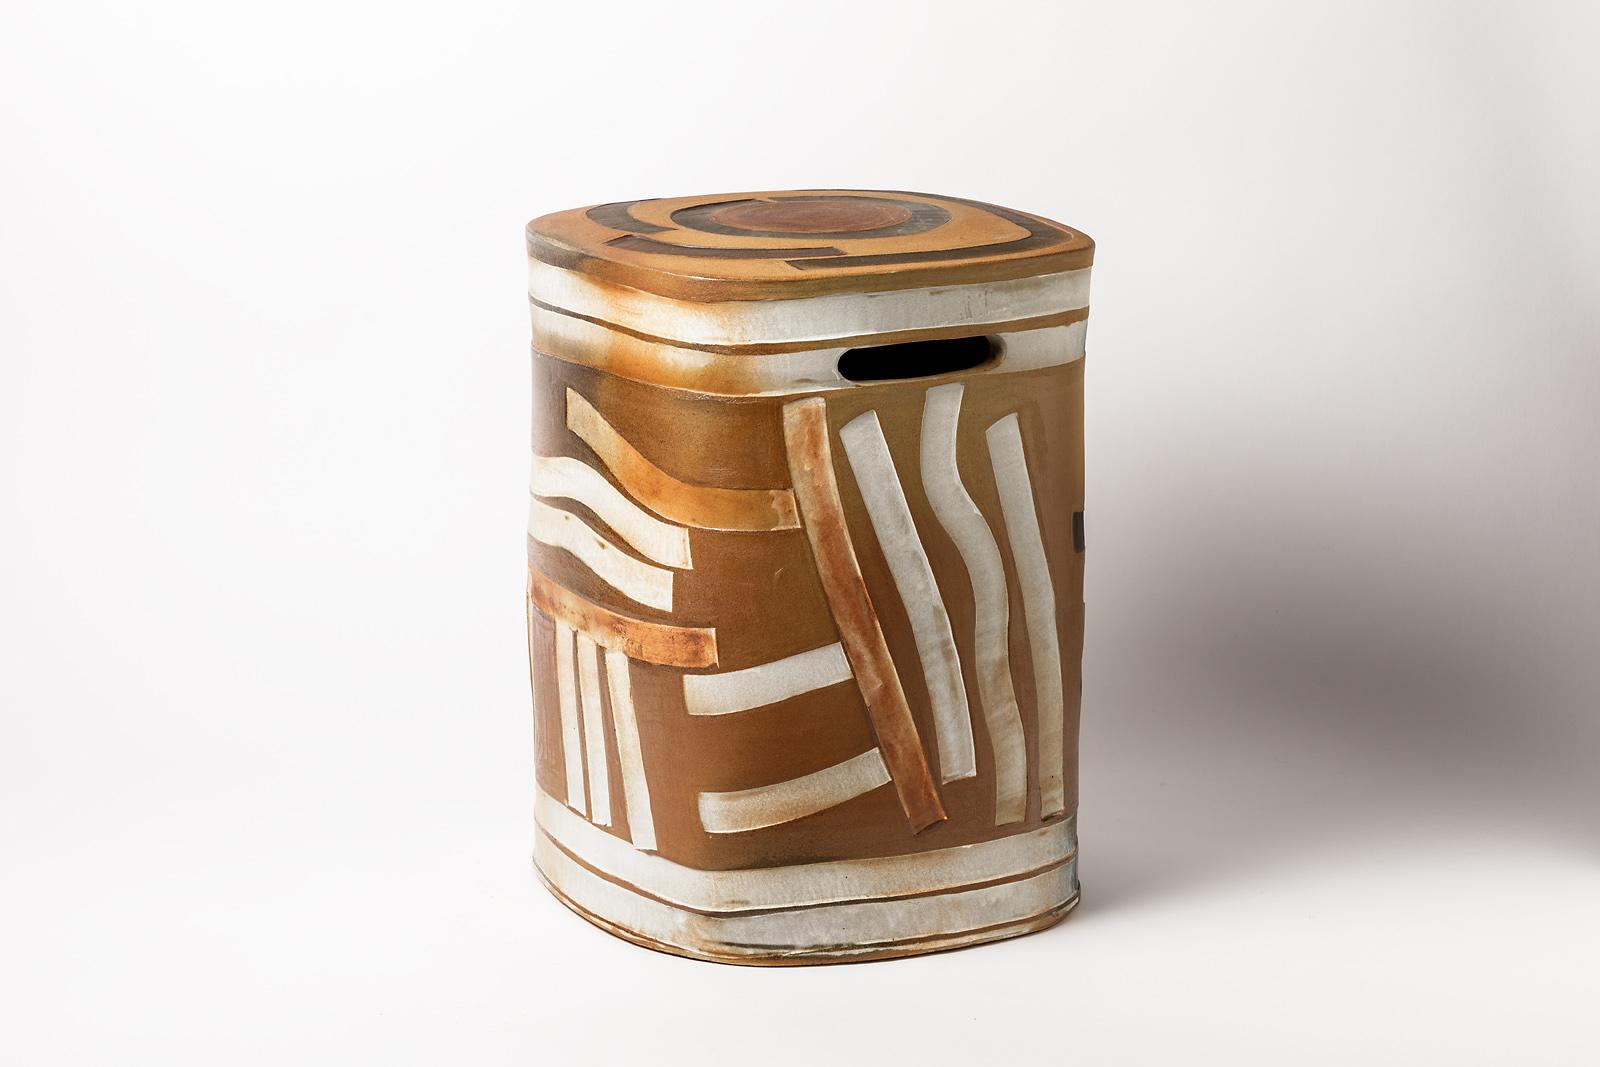 Contemporary Black and Brown Stoneware Ceramic Stool by Roz Herrin La Borne Table 11/11 For Sale